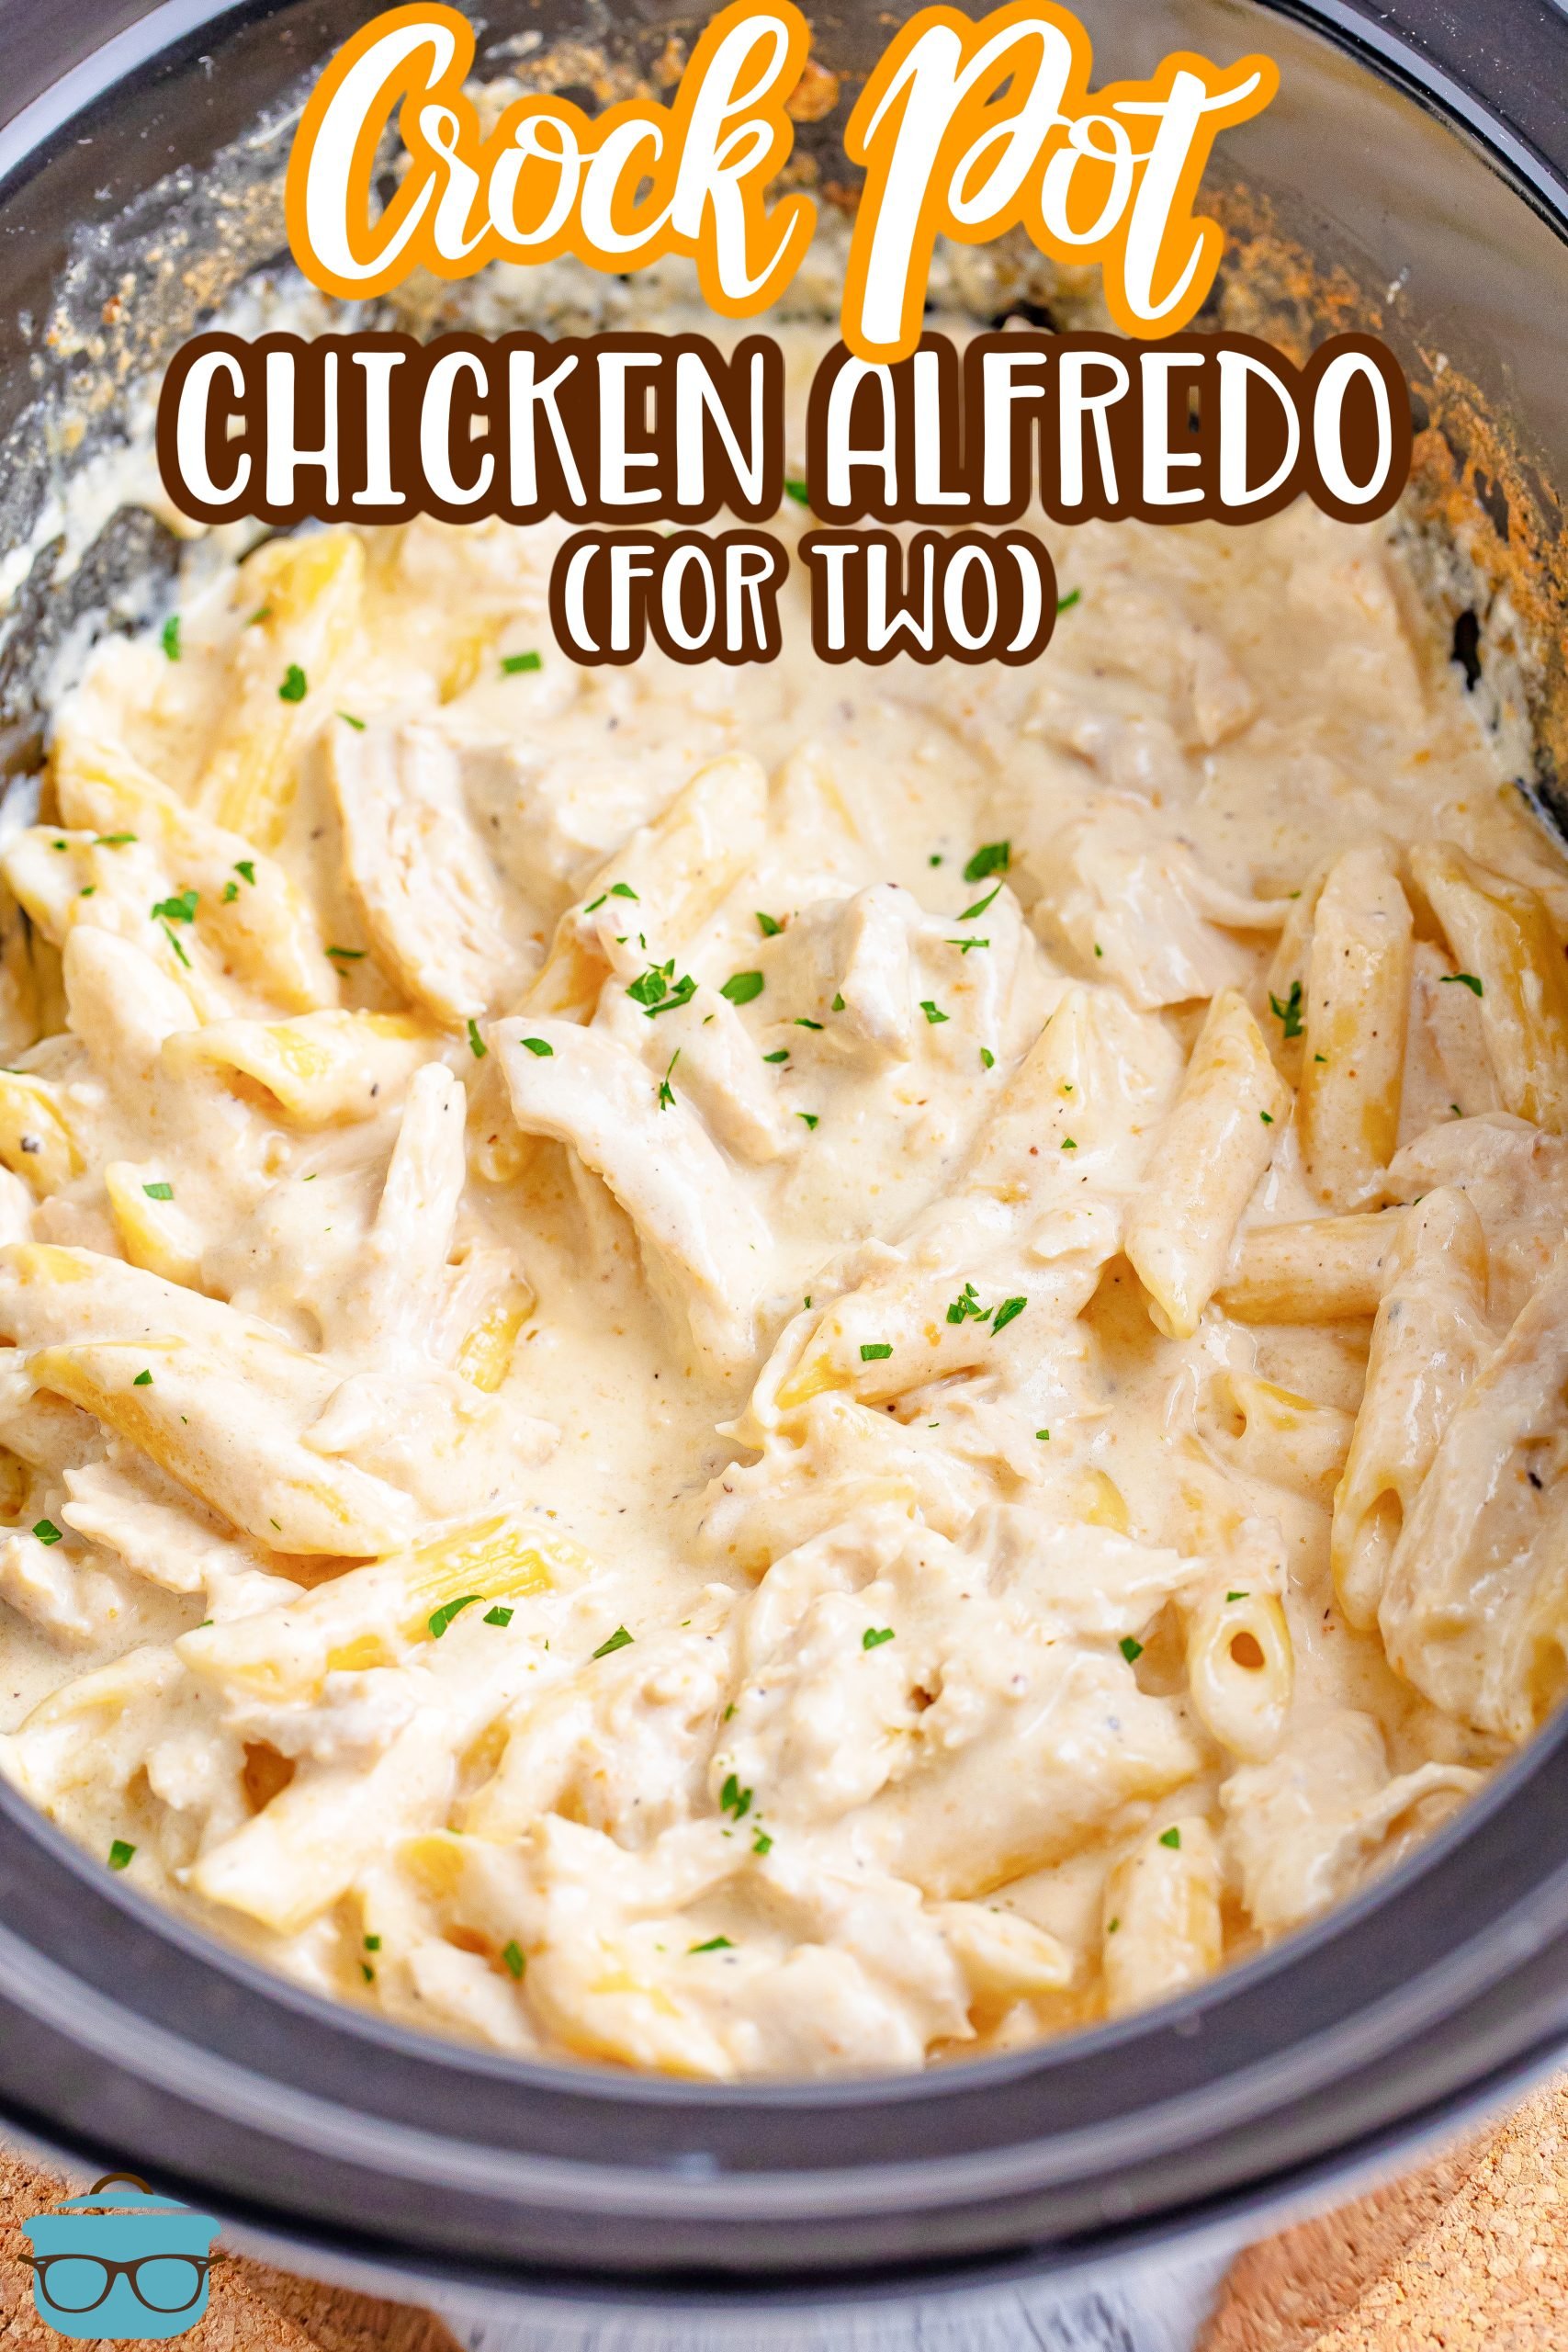 Looking down on a Crockpot with Chicken Alfredo for Two.